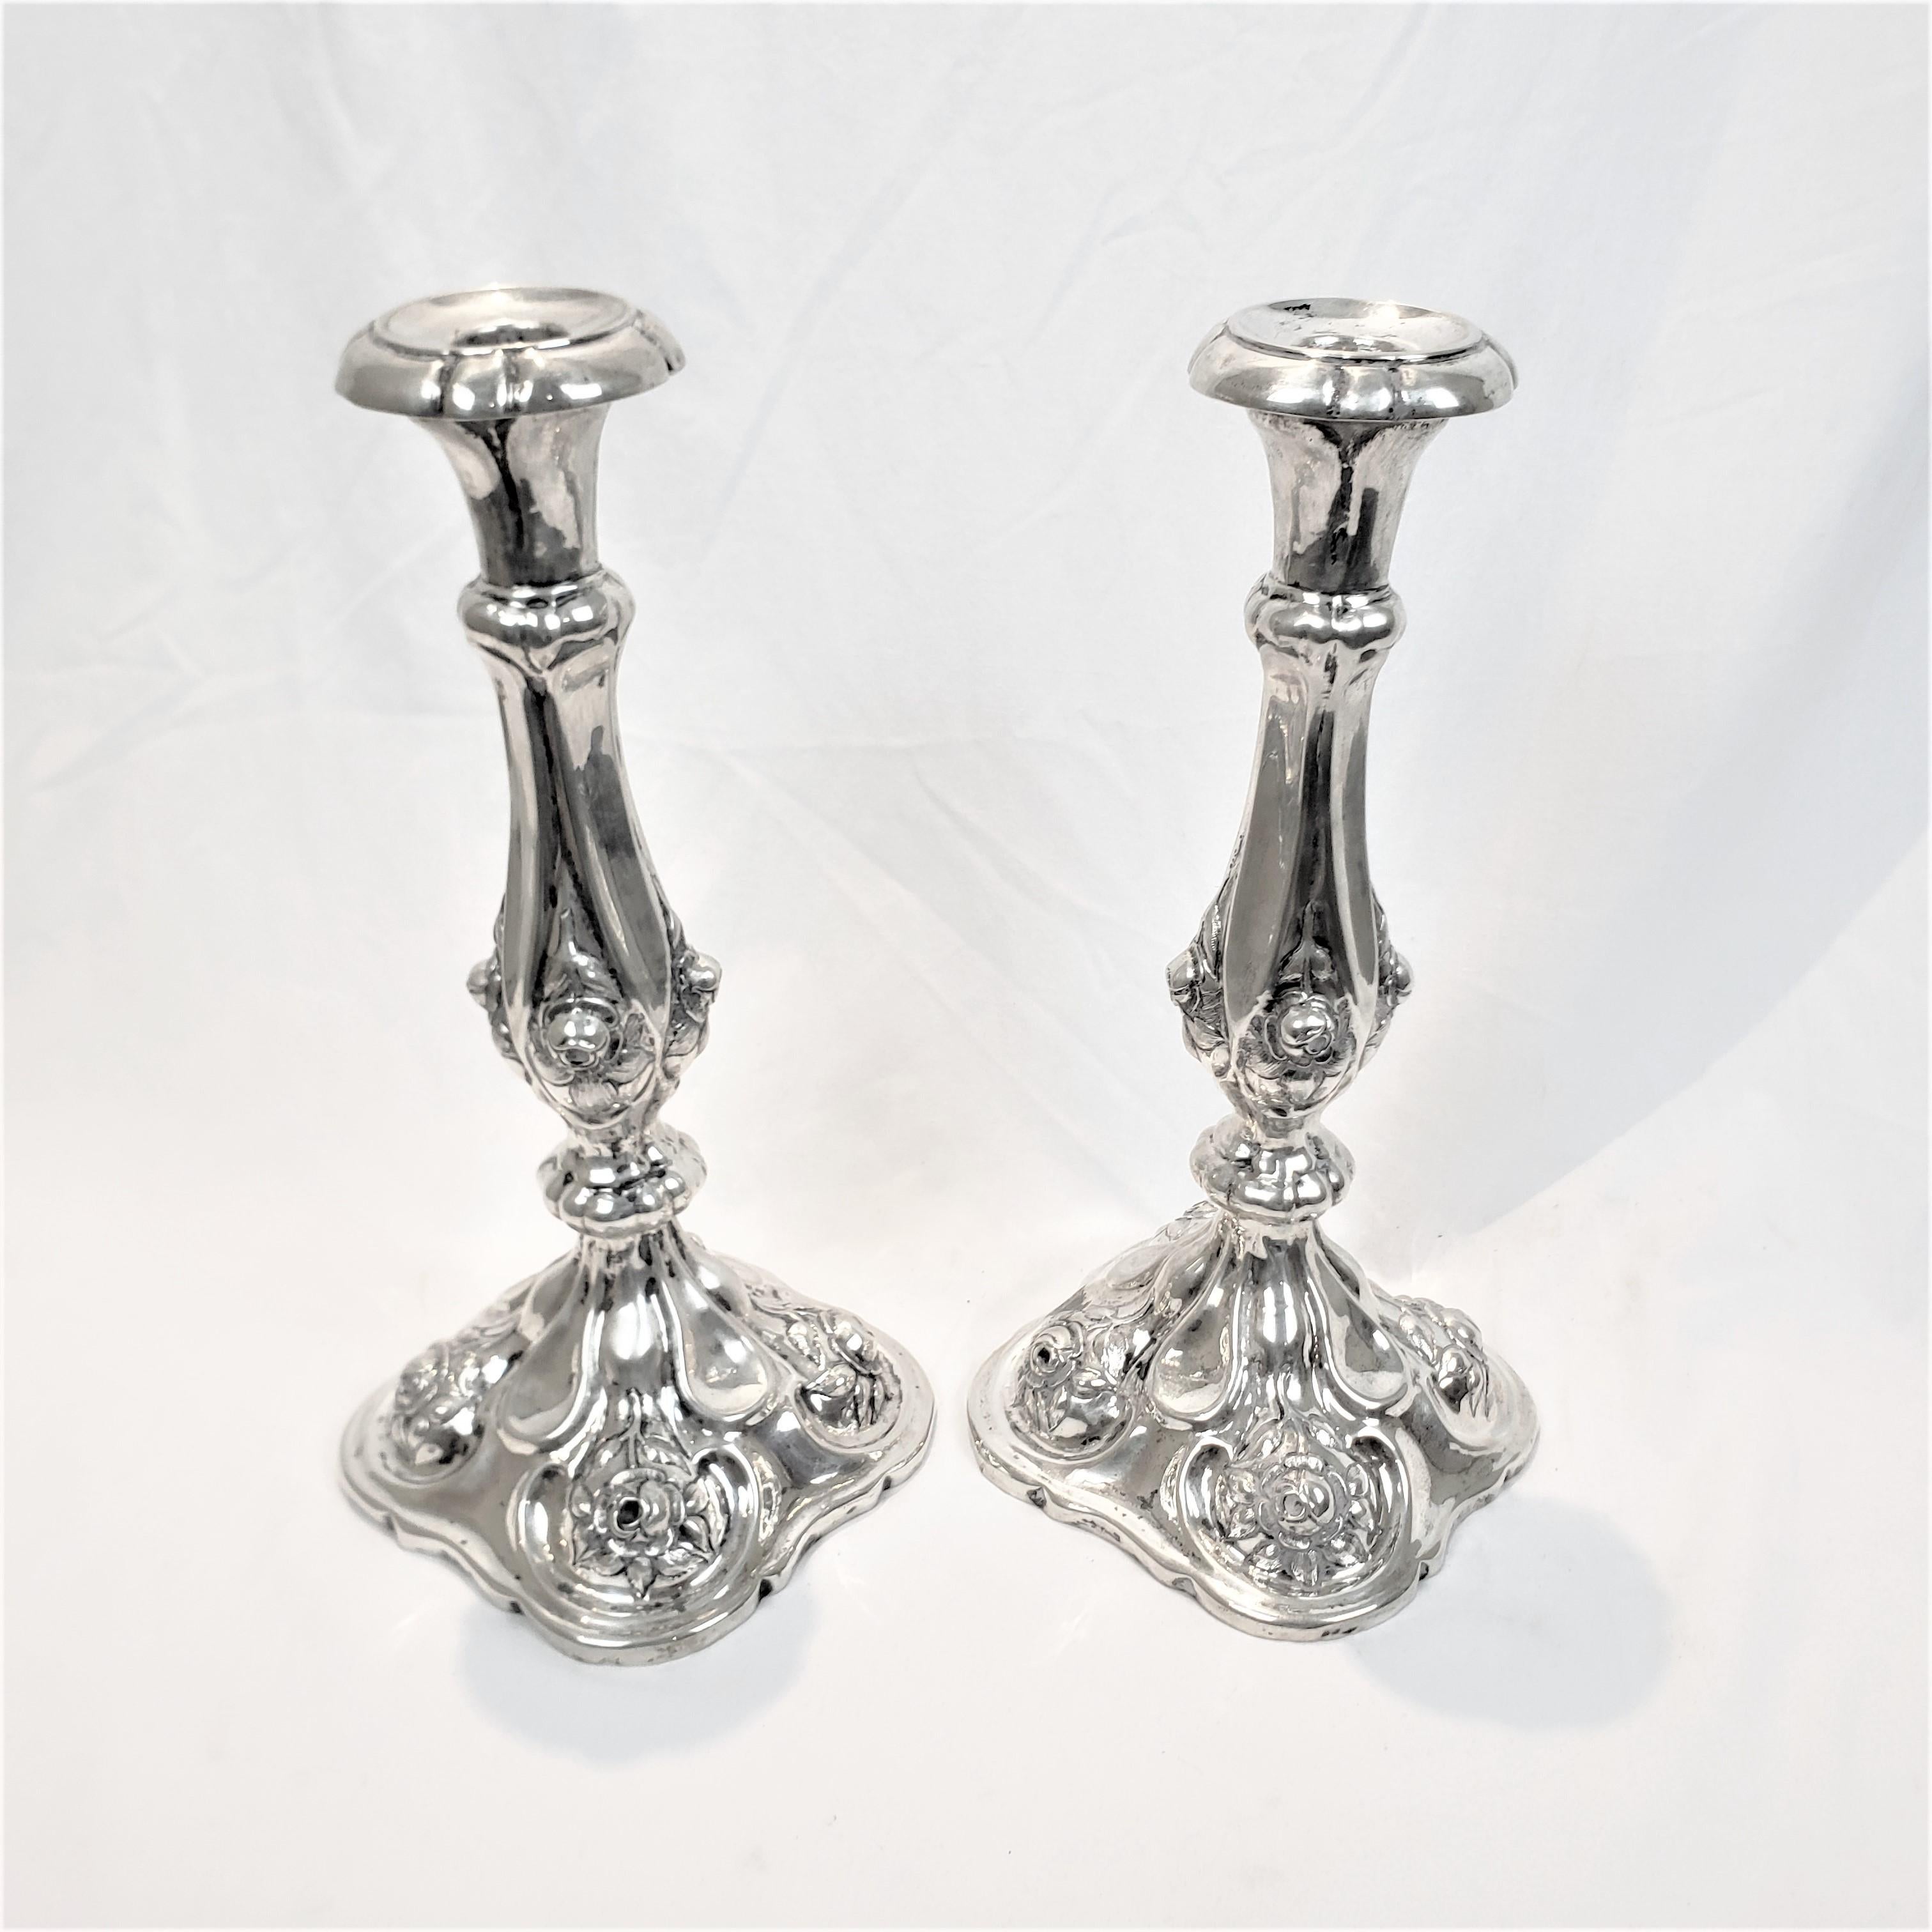 Austrian Pair of Antique Austro-Hungarian Silver Candlesticks with Chased Flowers For Sale